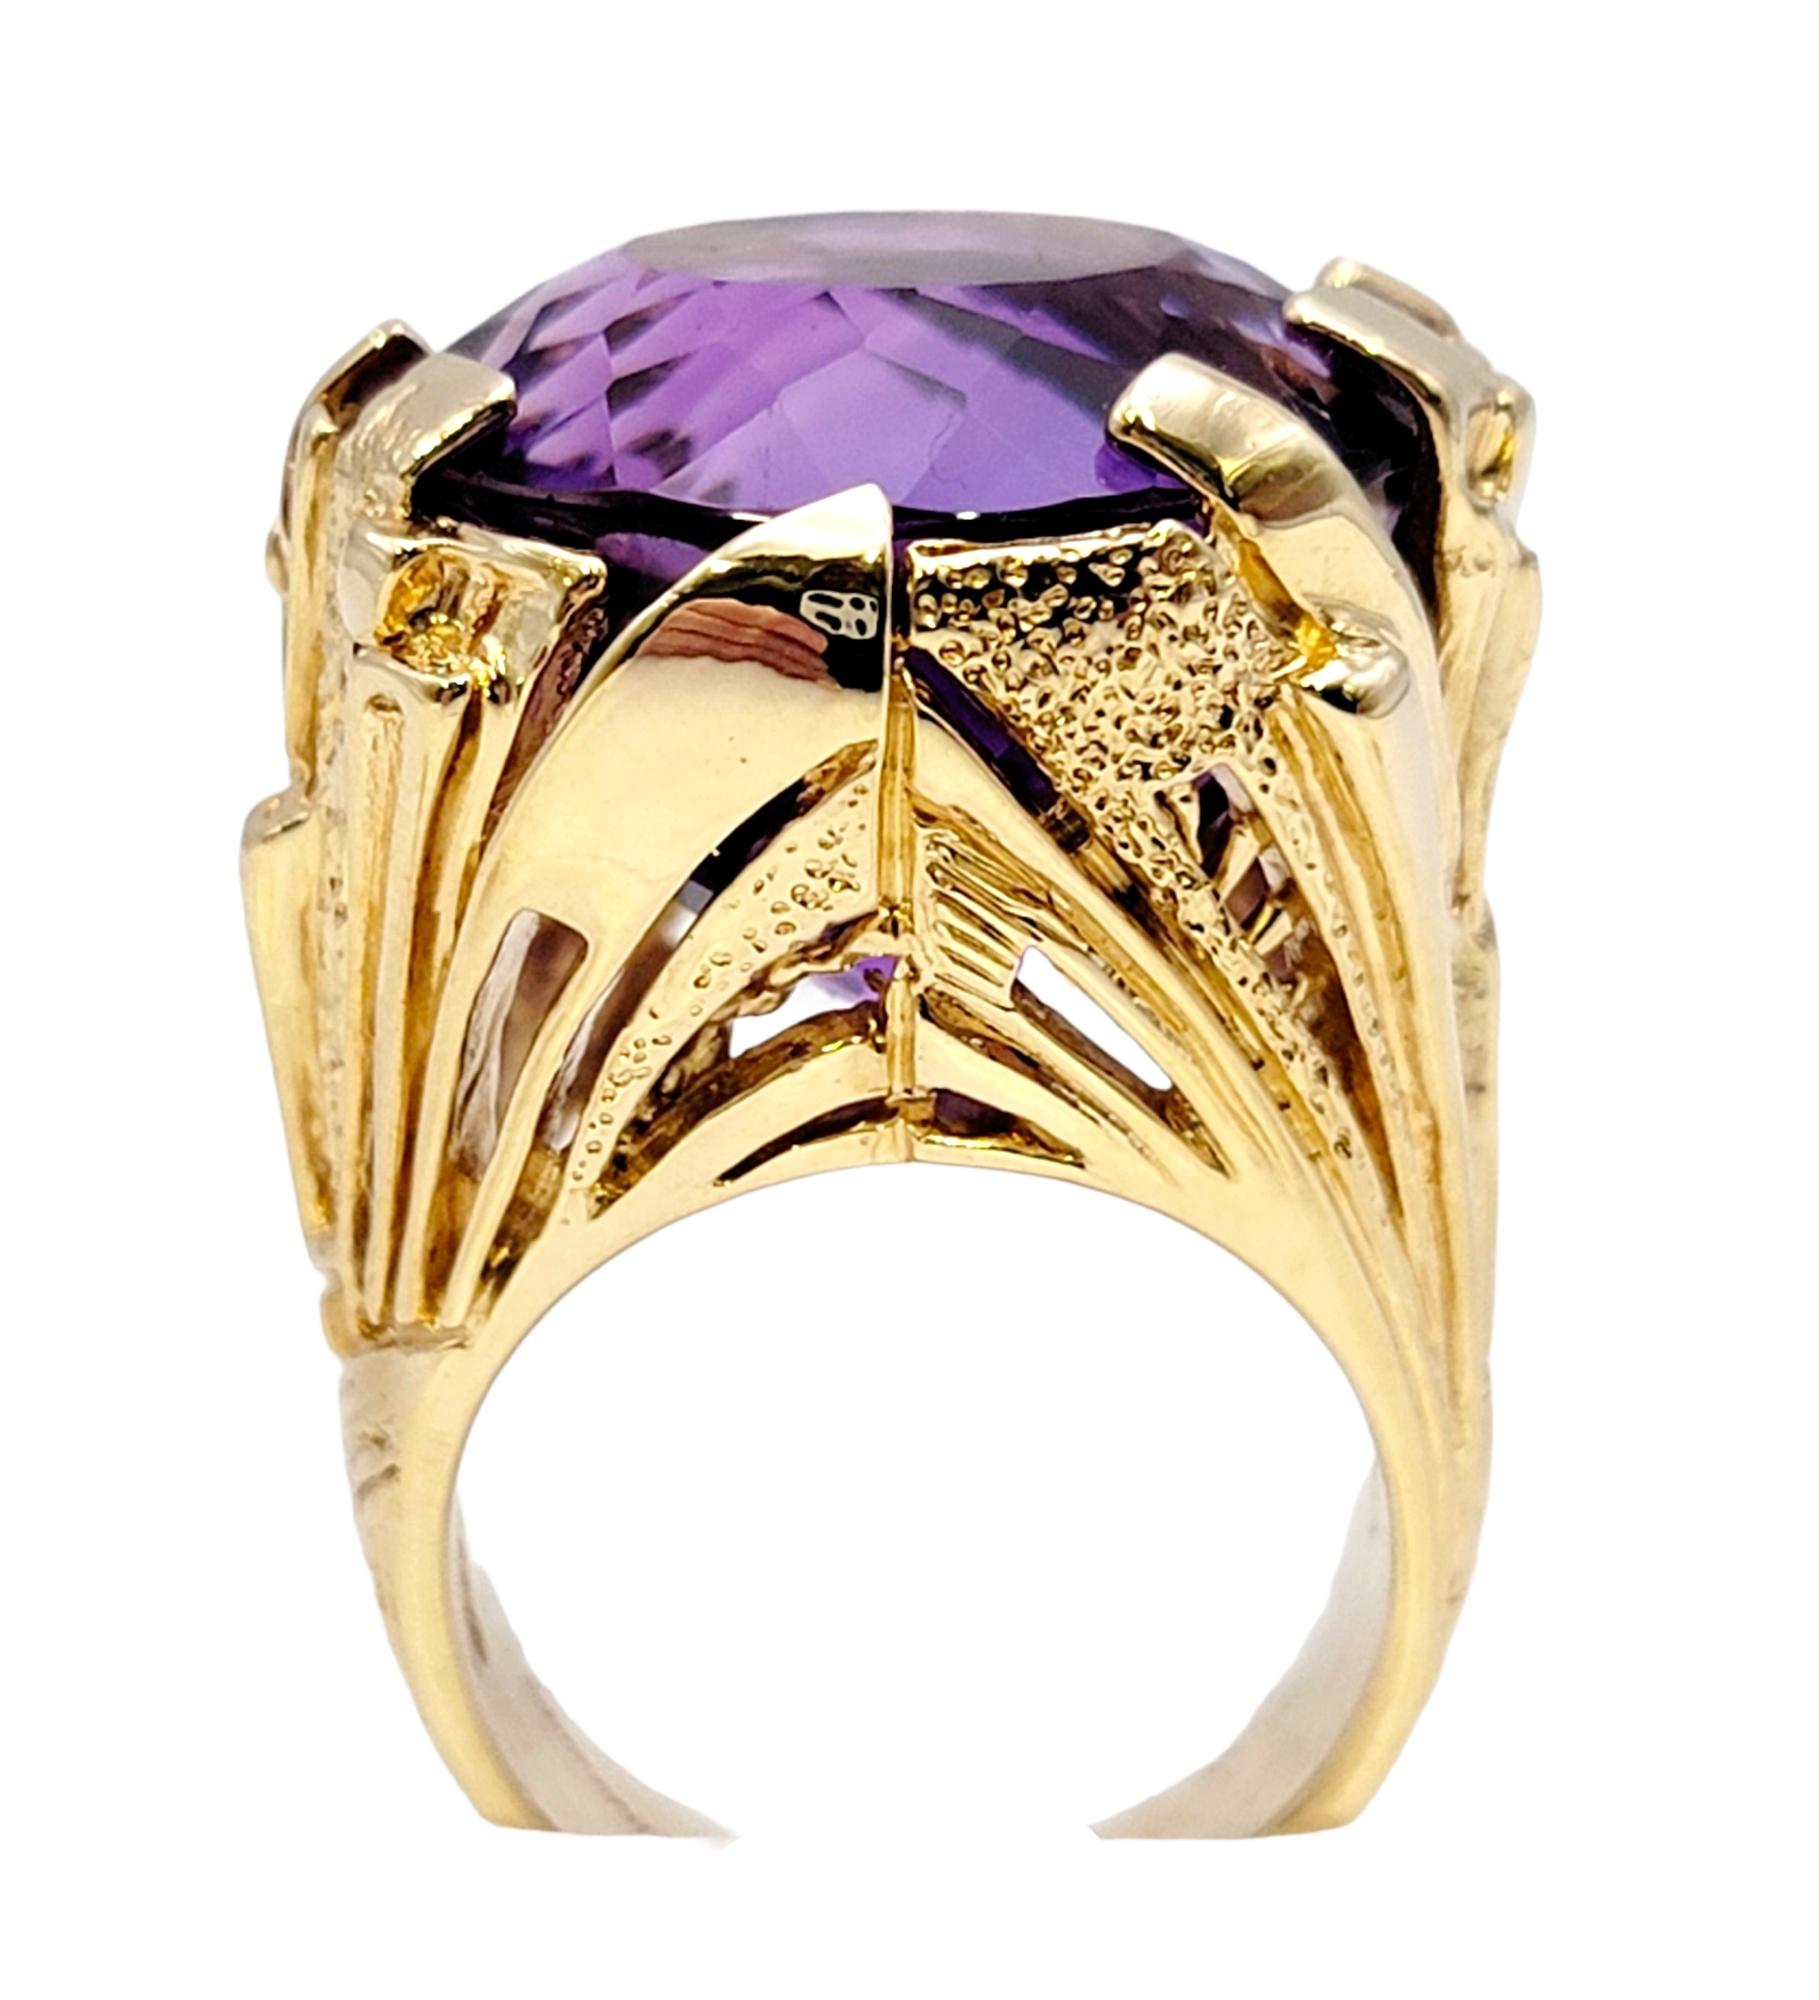 Massive 40.01 Carat Round Cut Amethyst Solitaire Cocktail Ring in Yellow Gold  For Sale 2